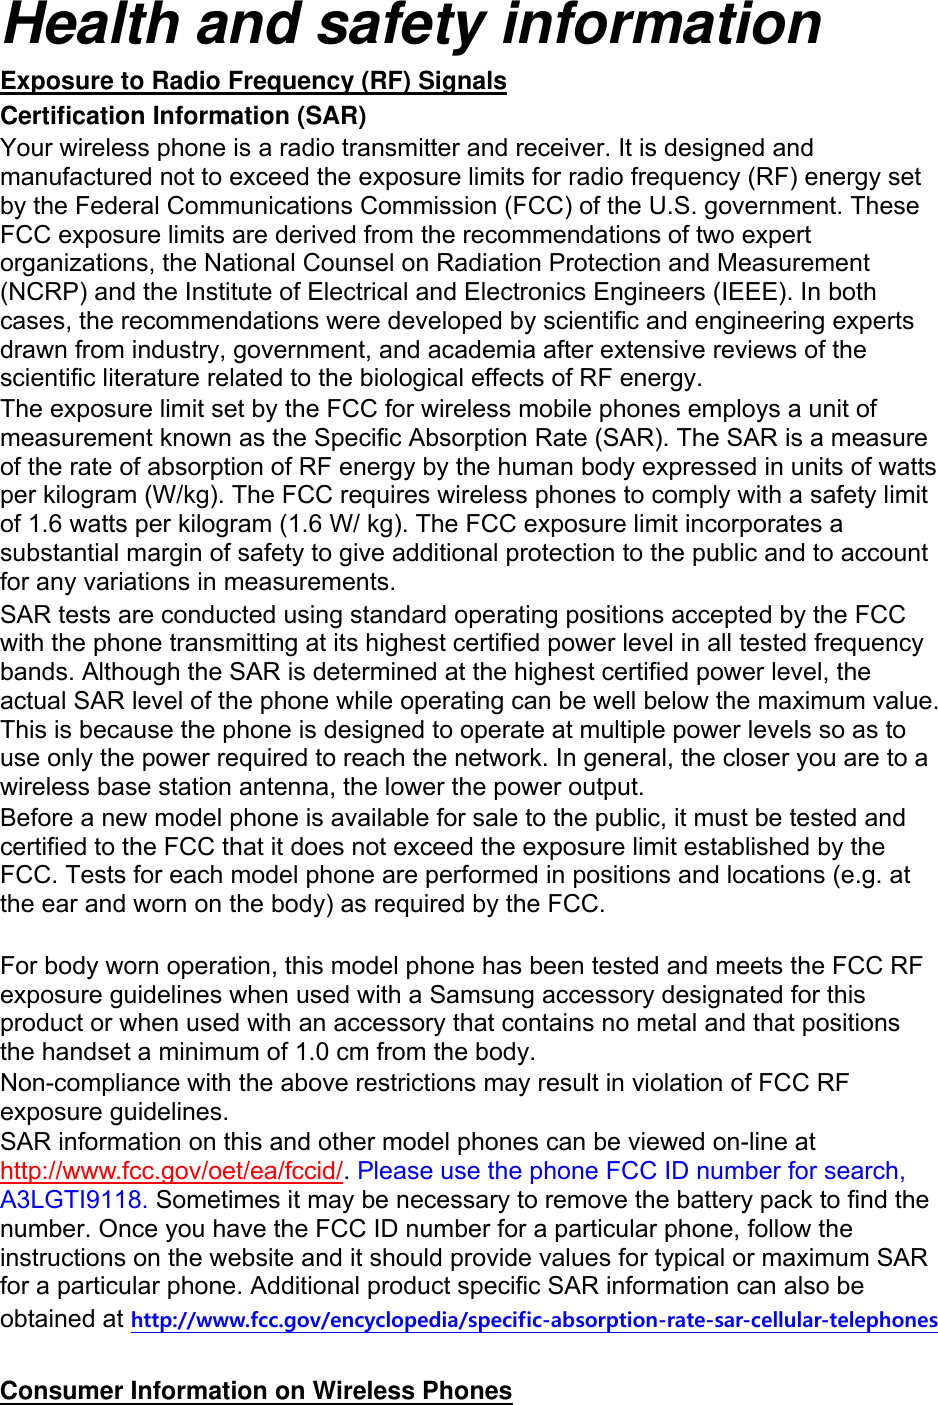 Health and safety information Exposure to Radio Frequency (RF) Signals Certification Information (SAR) Your wireless phone is a radio transmitter and receiver. It is designed and manufactured not to exceed the exposure limits for radio frequency (RF) energy set by the Federal Communications Commission (FCC) of the U.S. government. These FCC exposure limits are derived from the recommendations of two expert organizations, the National Counsel on Radiation Protection and Measurement (NCRP) and the Institute of Electrical and Electronics Engineers (IEEE). In both cases, the recommendations were developed by scientific and engineering experts drawn from industry, government, and academia after extensive reviews of the scientific literature related to the biological effects of RF energy. The exposure limit set by the FCC for wireless mobile phones employs a unit of measurement known as the Specific Absorption Rate (SAR). The SAR is a measure of the rate of absorption of RF energy by the human body expressed in units of watts per kilogram (W/kg). The FCC requires wireless phones to comply with a safety limit of 1.6 watts per kilogram (1.6 W/ kg). The FCC exposure limit incorporates a substantial margin of safety to give additional protection to the public and to account for any variations in measurements. SAR tests are conducted using standard operating positions accepted by the FCC with the phone transmitting at its highest certified power level in all tested frequency bands. Although the SAR is determined at the highest certified power level, the actual SAR level of the phone while operating can be well below the maximum value. This is because the phone is designed to operate at multiple power levels so as to use only the power required to reach the network. In general, the closer you are to a wireless base station antenna, the lower the power output. Before a new model phone is available for sale to the public, it must be tested and certified to the FCC that it does not exceed the exposure limit established by the FCC. Tests for each model phone are performed in positions and locations (e.g. at the ear and worn on the body) as required by the FCC.      For body worn operation, this model phone has been tested and meets the FCC RF exposure guidelines when used with a Samsung accessory designated for this product or when used with an accessory that contains no metal and that positions the handset a minimum of 1.0 cm from the body.   Non-compliance with the above restrictions may result in violation of FCC RF exposure guidelines. SAR information on this and other model phones can be viewed on-line at http://www.fcc.gov/oet/ea/fccid/. Please use the phone FCC ID number for search, A3LGTI9118. Sometimes it may be necessary to remove the battery pack to find the number. Once you have the FCC ID number for a particular phone, follow the instructions on the website and it should provide values for typical or maximum SAR for a particular phone. Additional product specific SAR information can also be obtained at http://www.fcc.gov/encyclopedia/specific-absorption-rate-sar-cellular-telephones  Consumer Information on Wireless Phones 